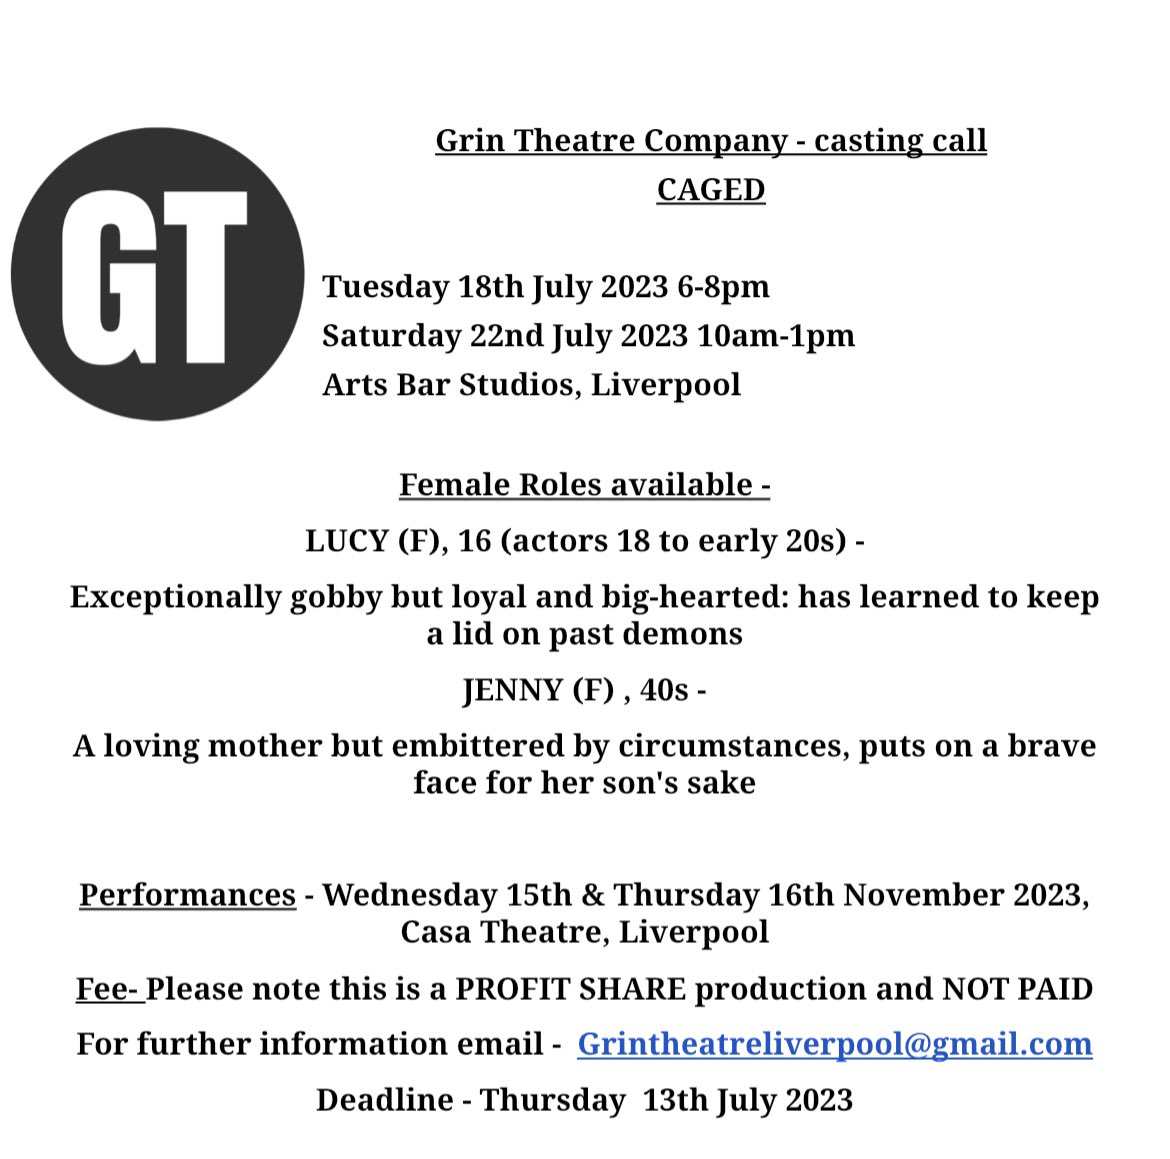 Caged auditions! Email Grintheatreliverpool@gmail.com for more information and to express interest

#liverpool #liverpooltheatre #lgbttheatrecommunity #audition #femaleactor #liverpoolaudition